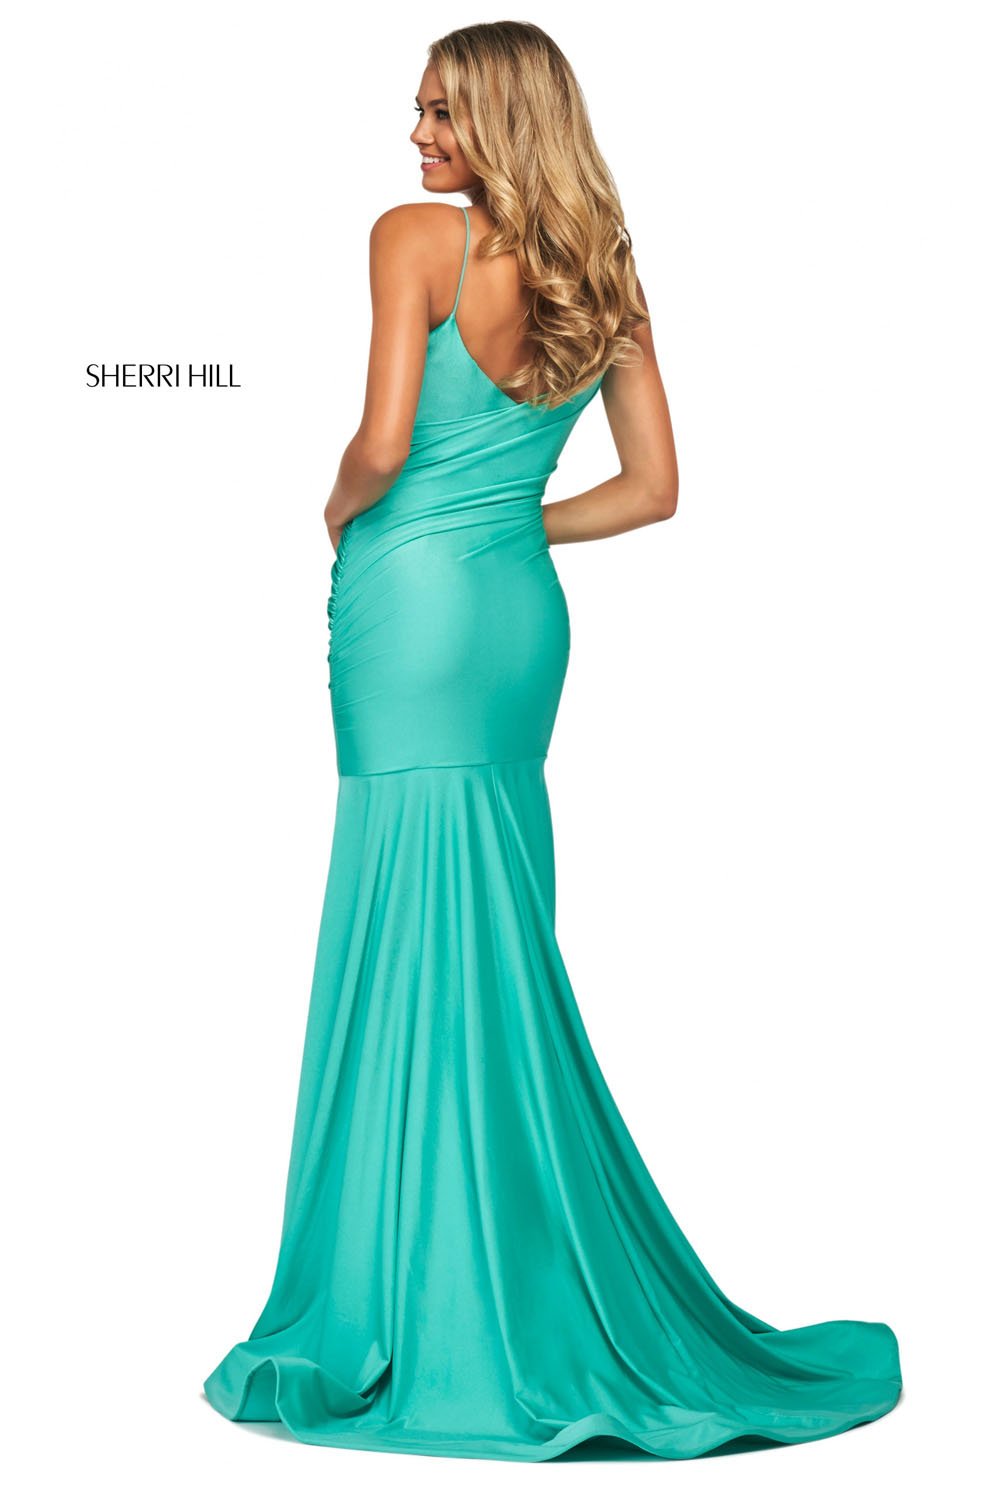 Sherri Hill 53809 dress images in these colors: Orange, Aqua, Royal, Lilac, Red, Candy Pink, Yellow, Black.